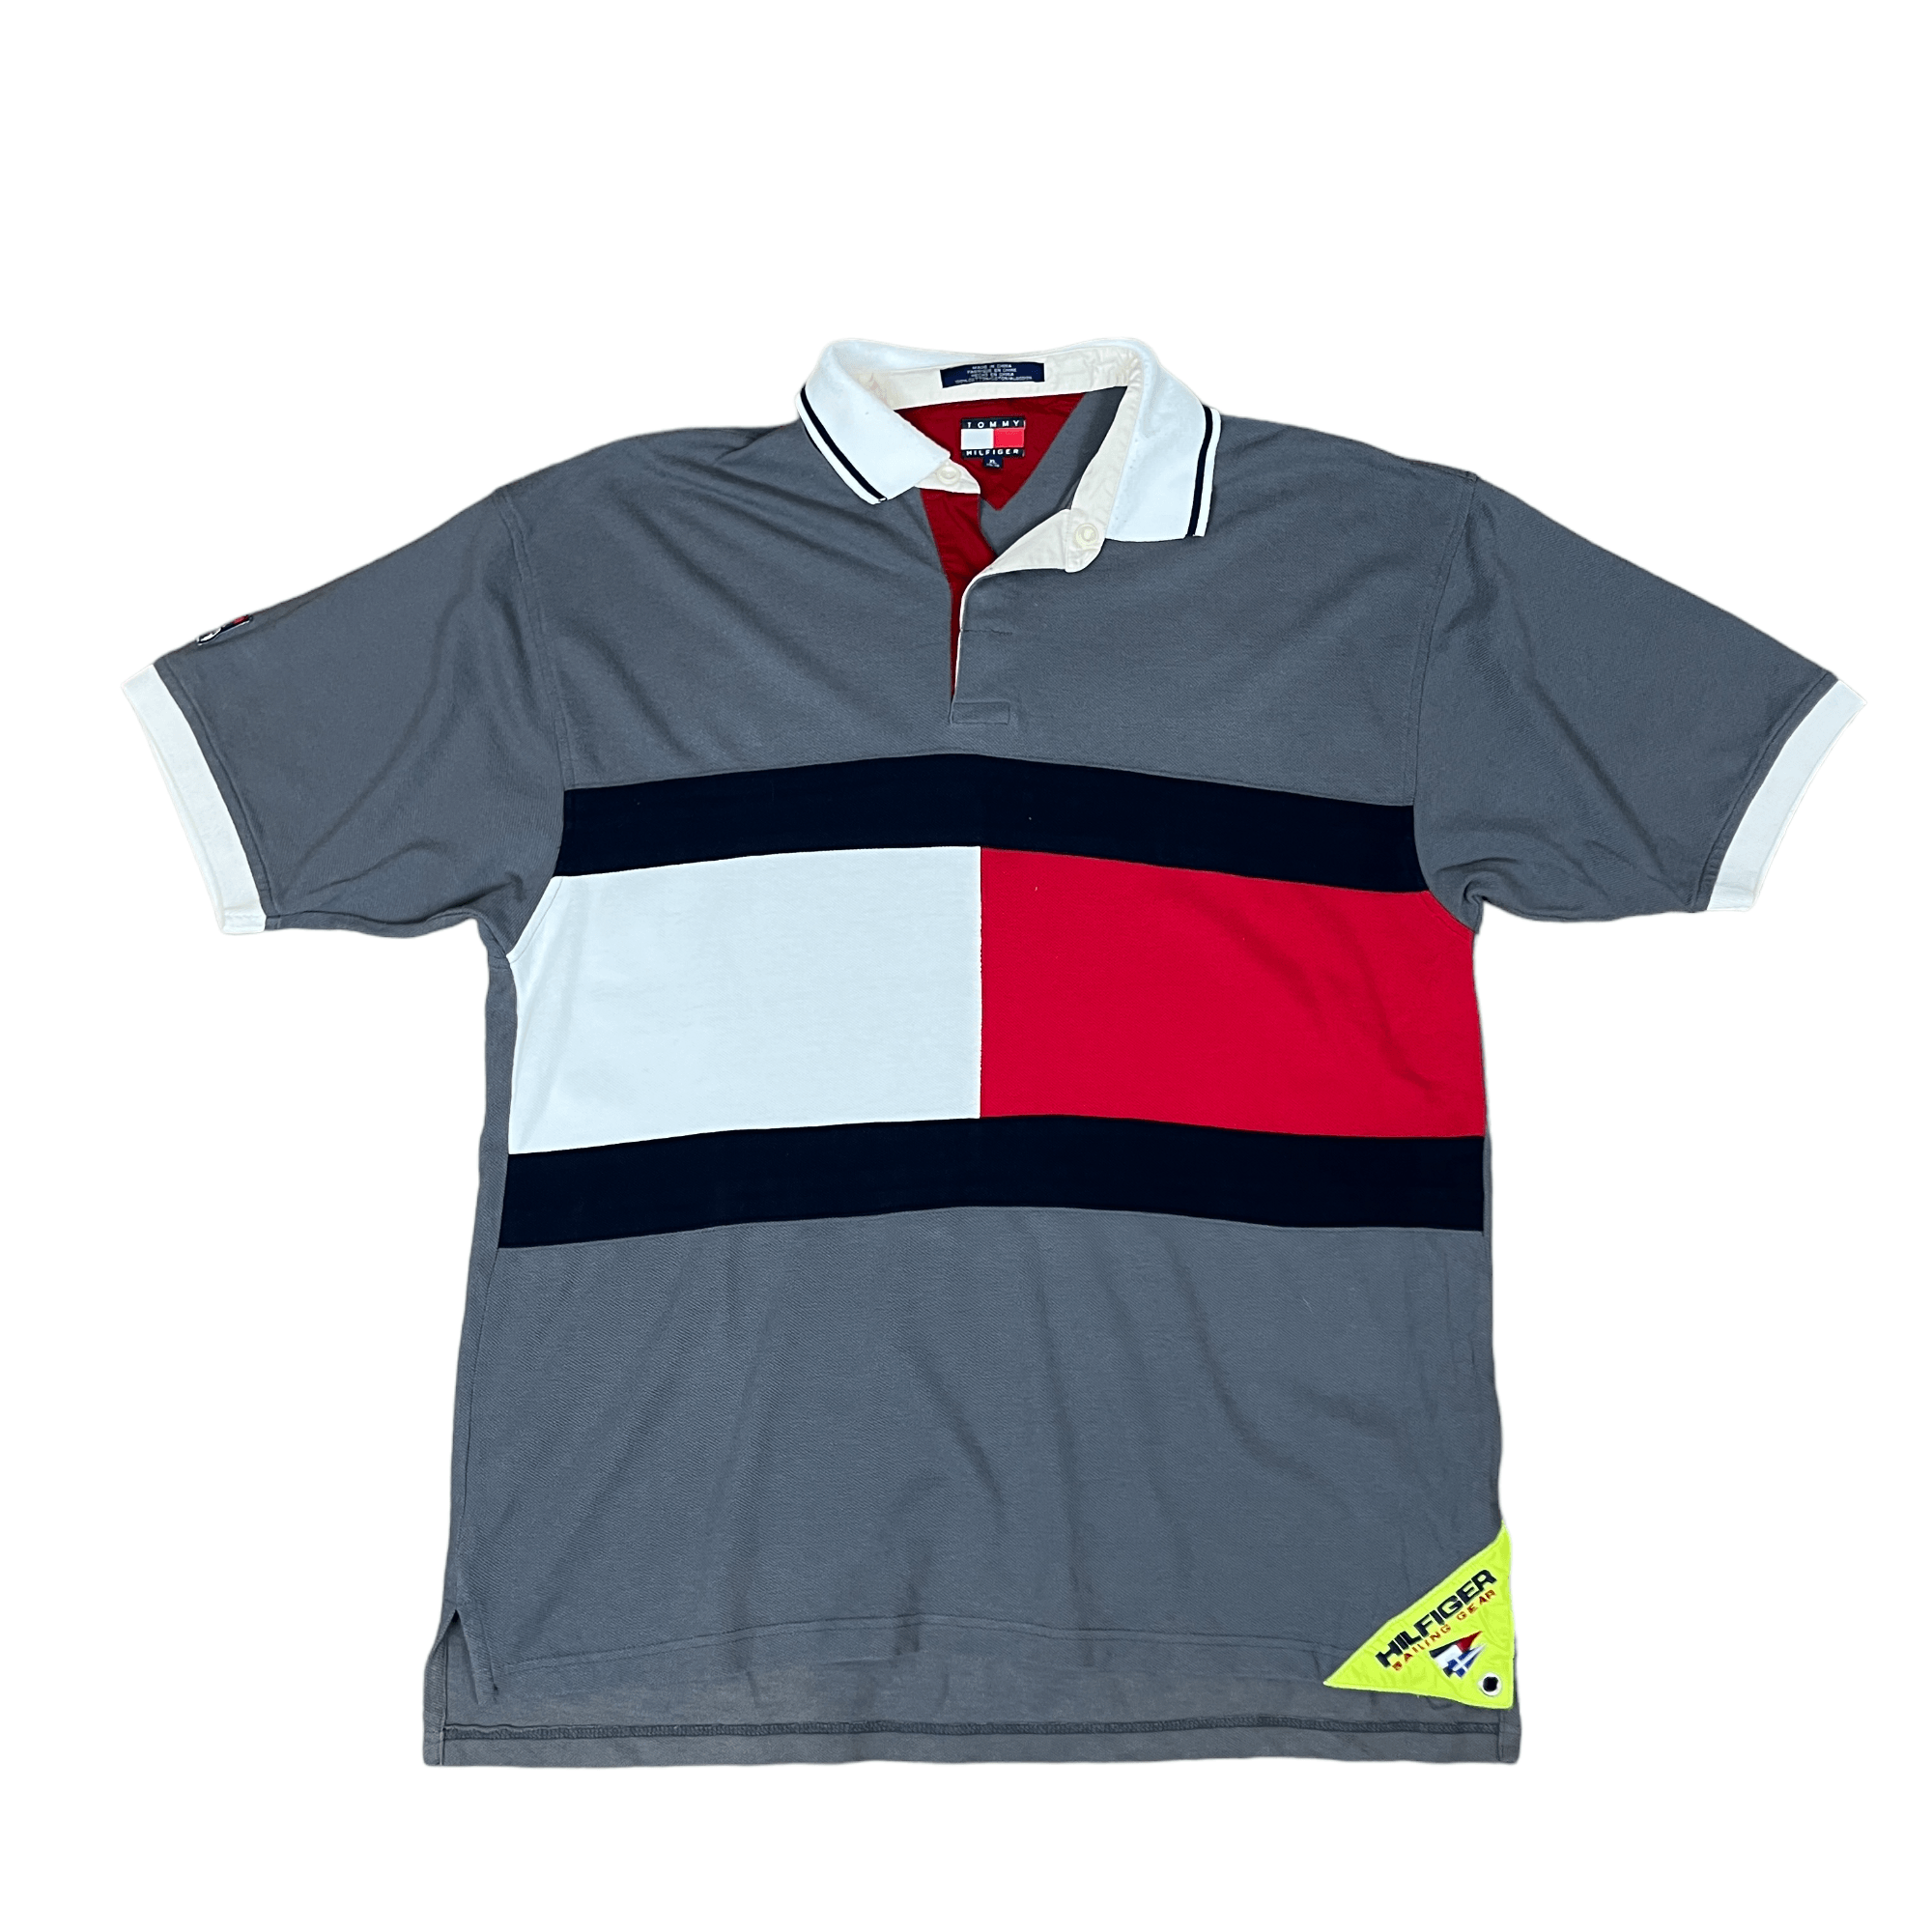 Vintage Grey Tommy Hilfiger Sailing Gear Polo Shirt - Extra Large - The Streetwear Studio